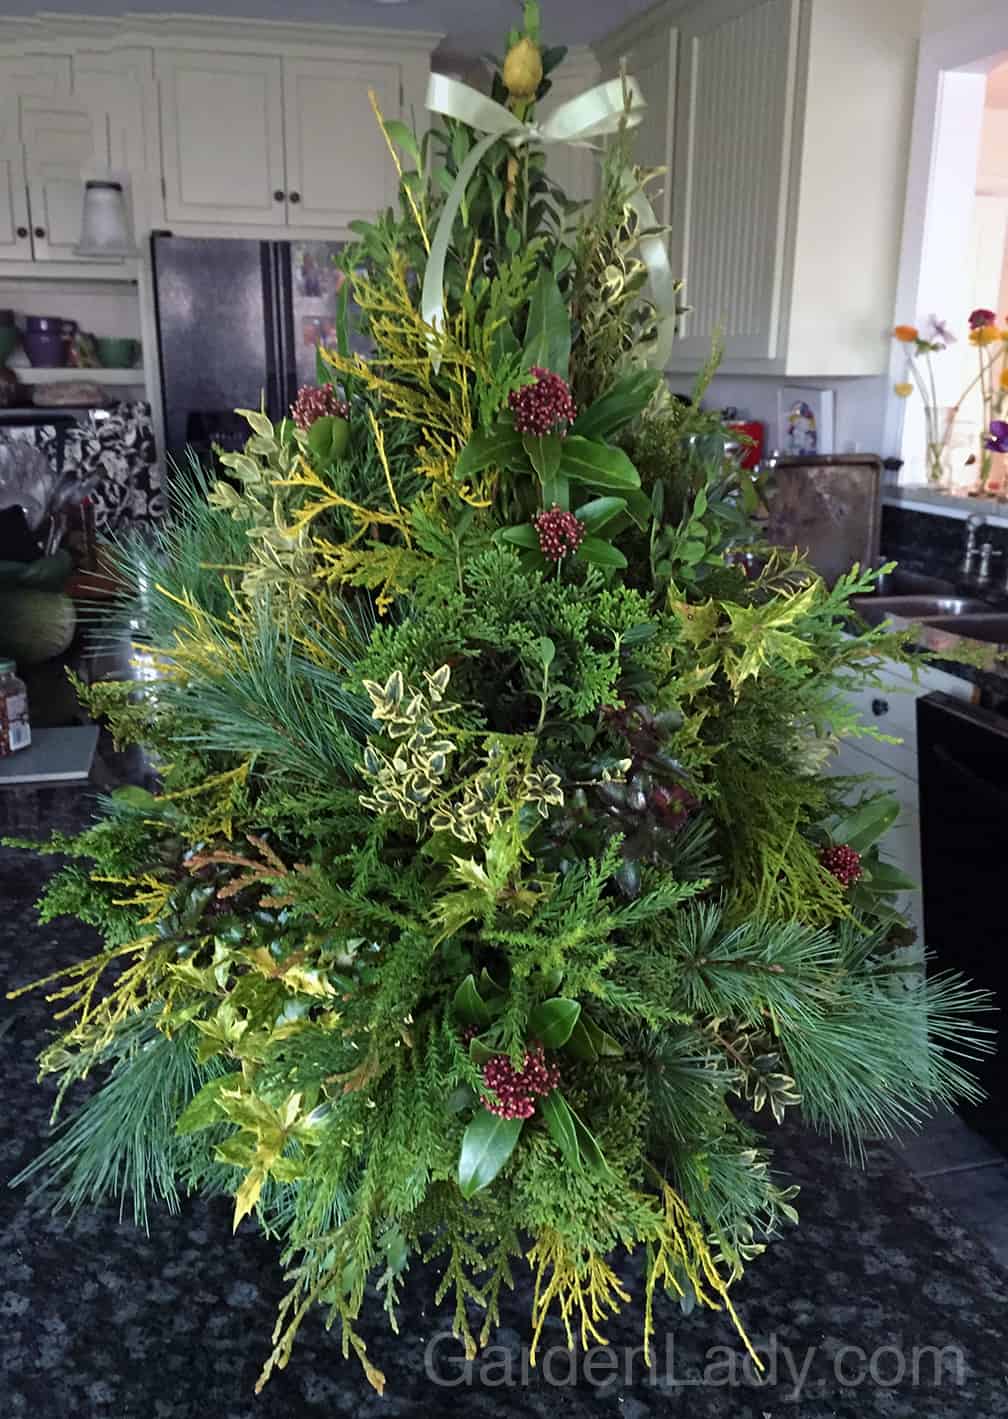 I made a mixed greens tree in Oasis in the same manner that boxwood trees are created. I was especially pleased with the Rhododendron bud used at the top of the tree.